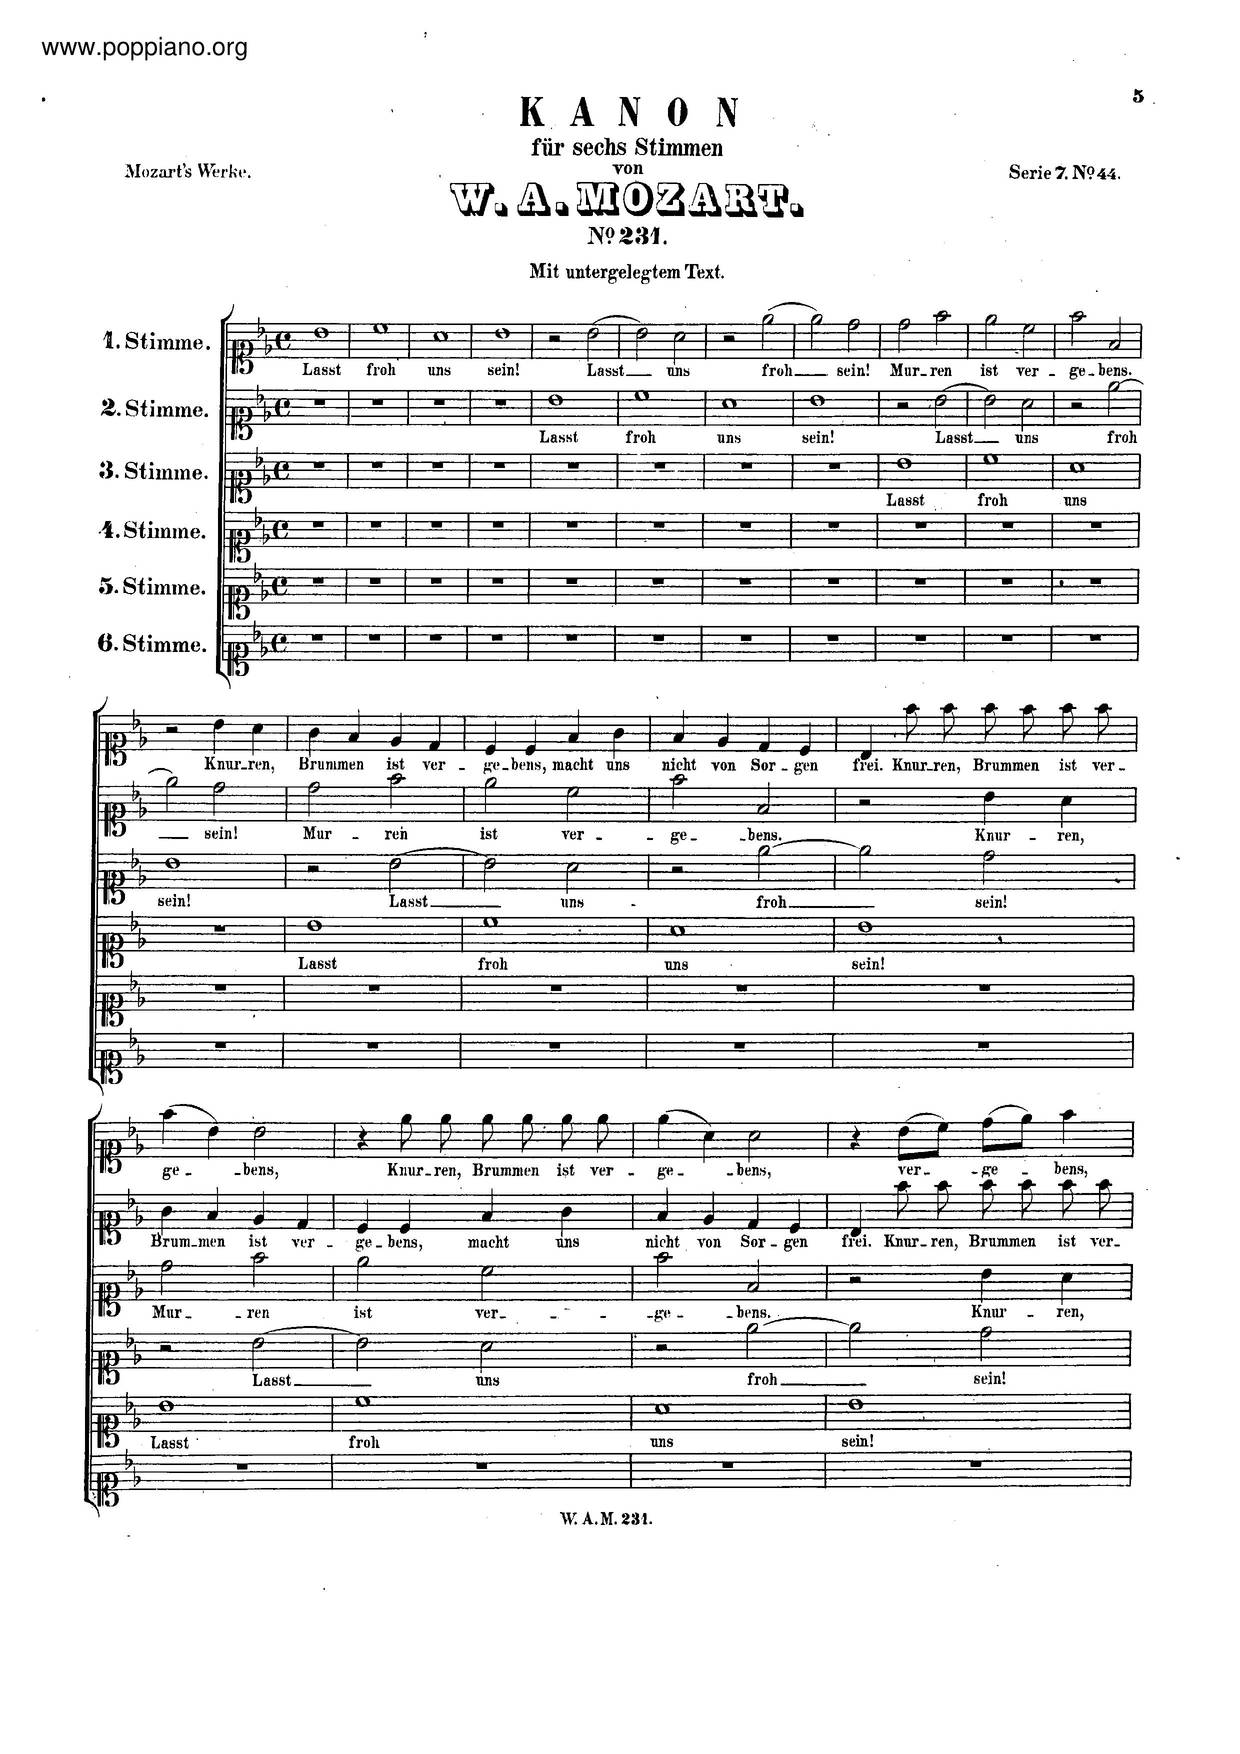 Canon For 6 Voices In B-Flat Major, K. 231/382C Score